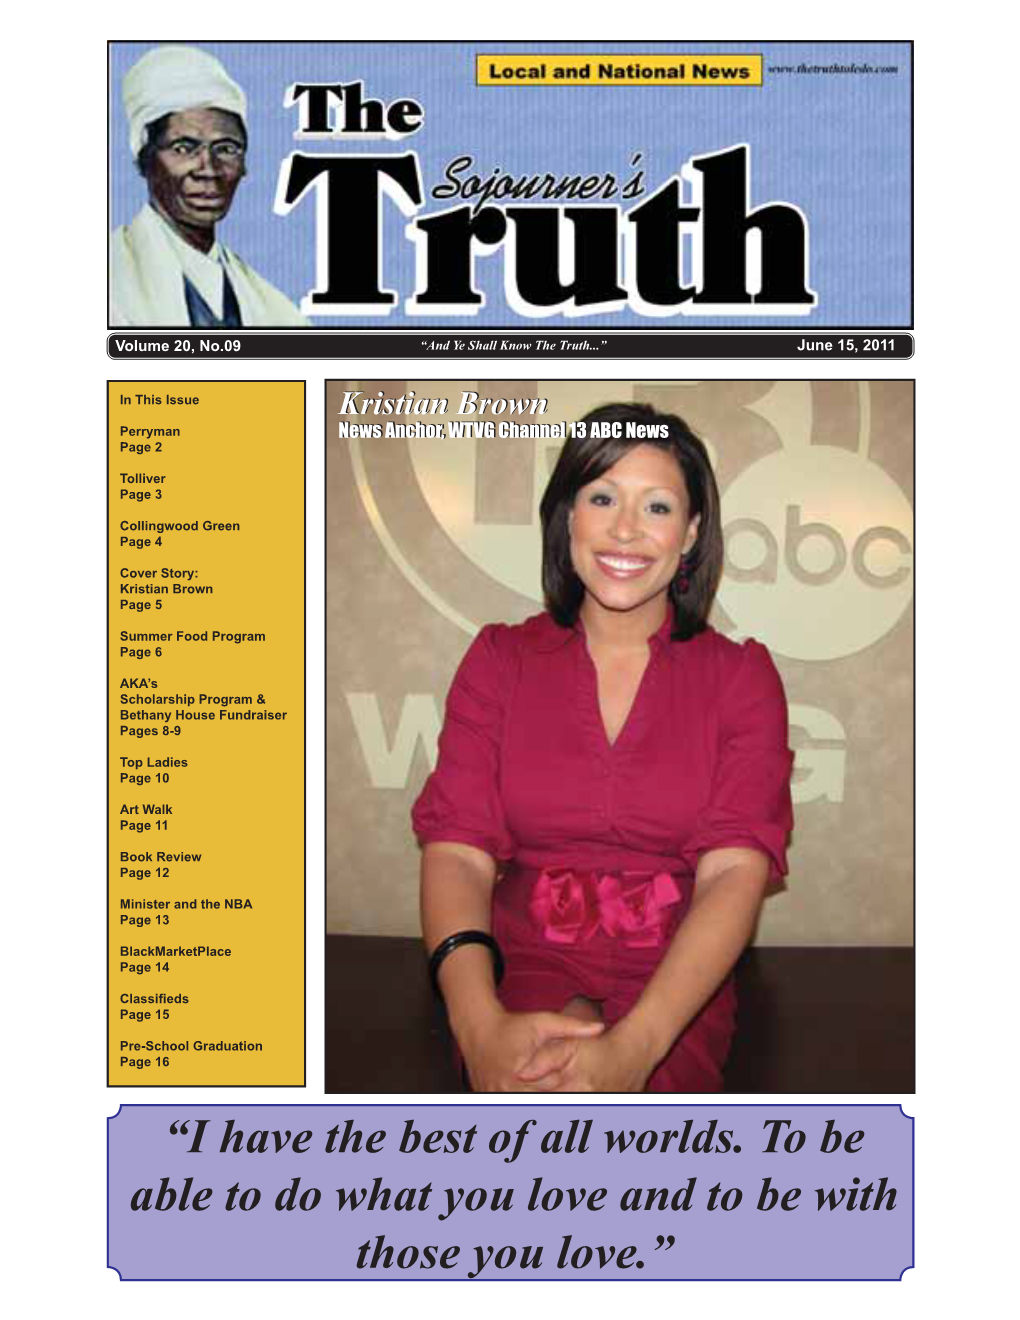 Kristian Brown Perryman News Anchor, WTVG Channel 13 ABC News Page 2